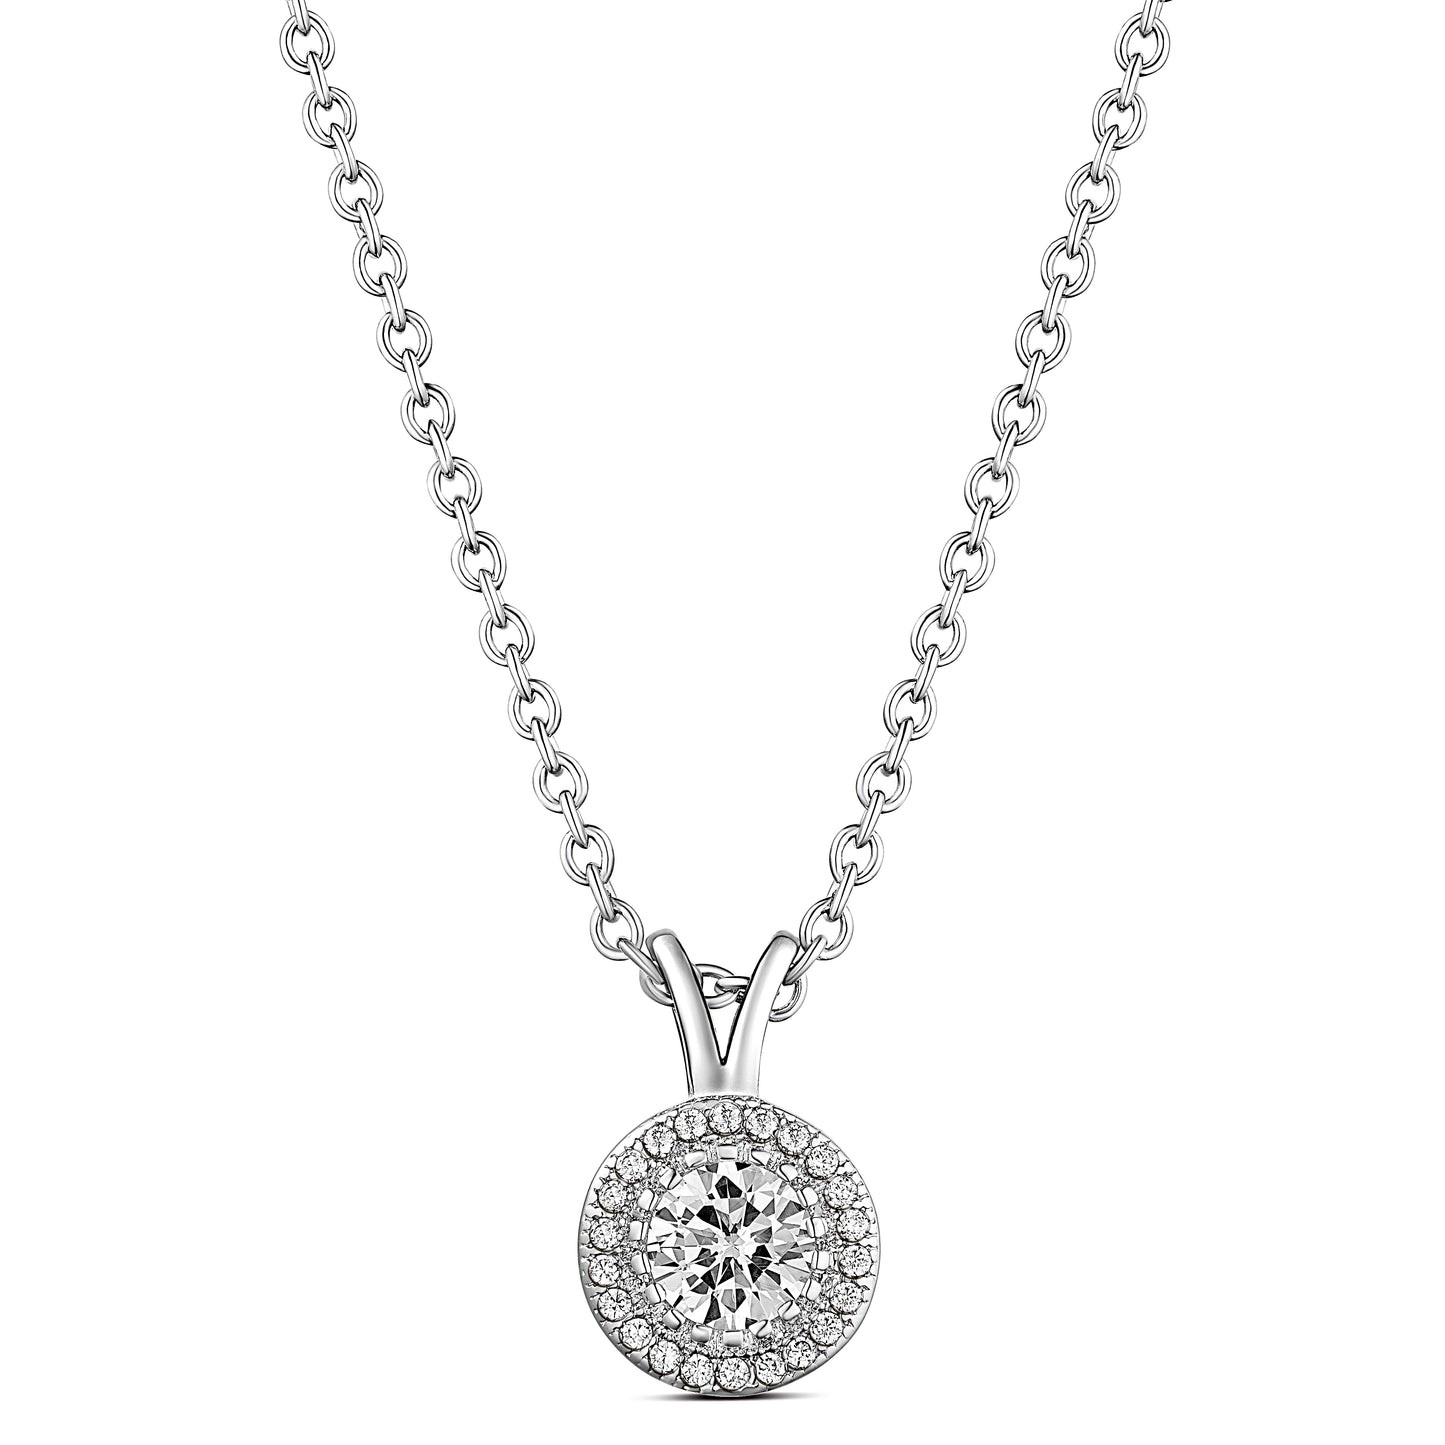 Sterling Silver Cluster CZ Stone Pendant with Chain, Pouch, Bath Bomb & Gift Box